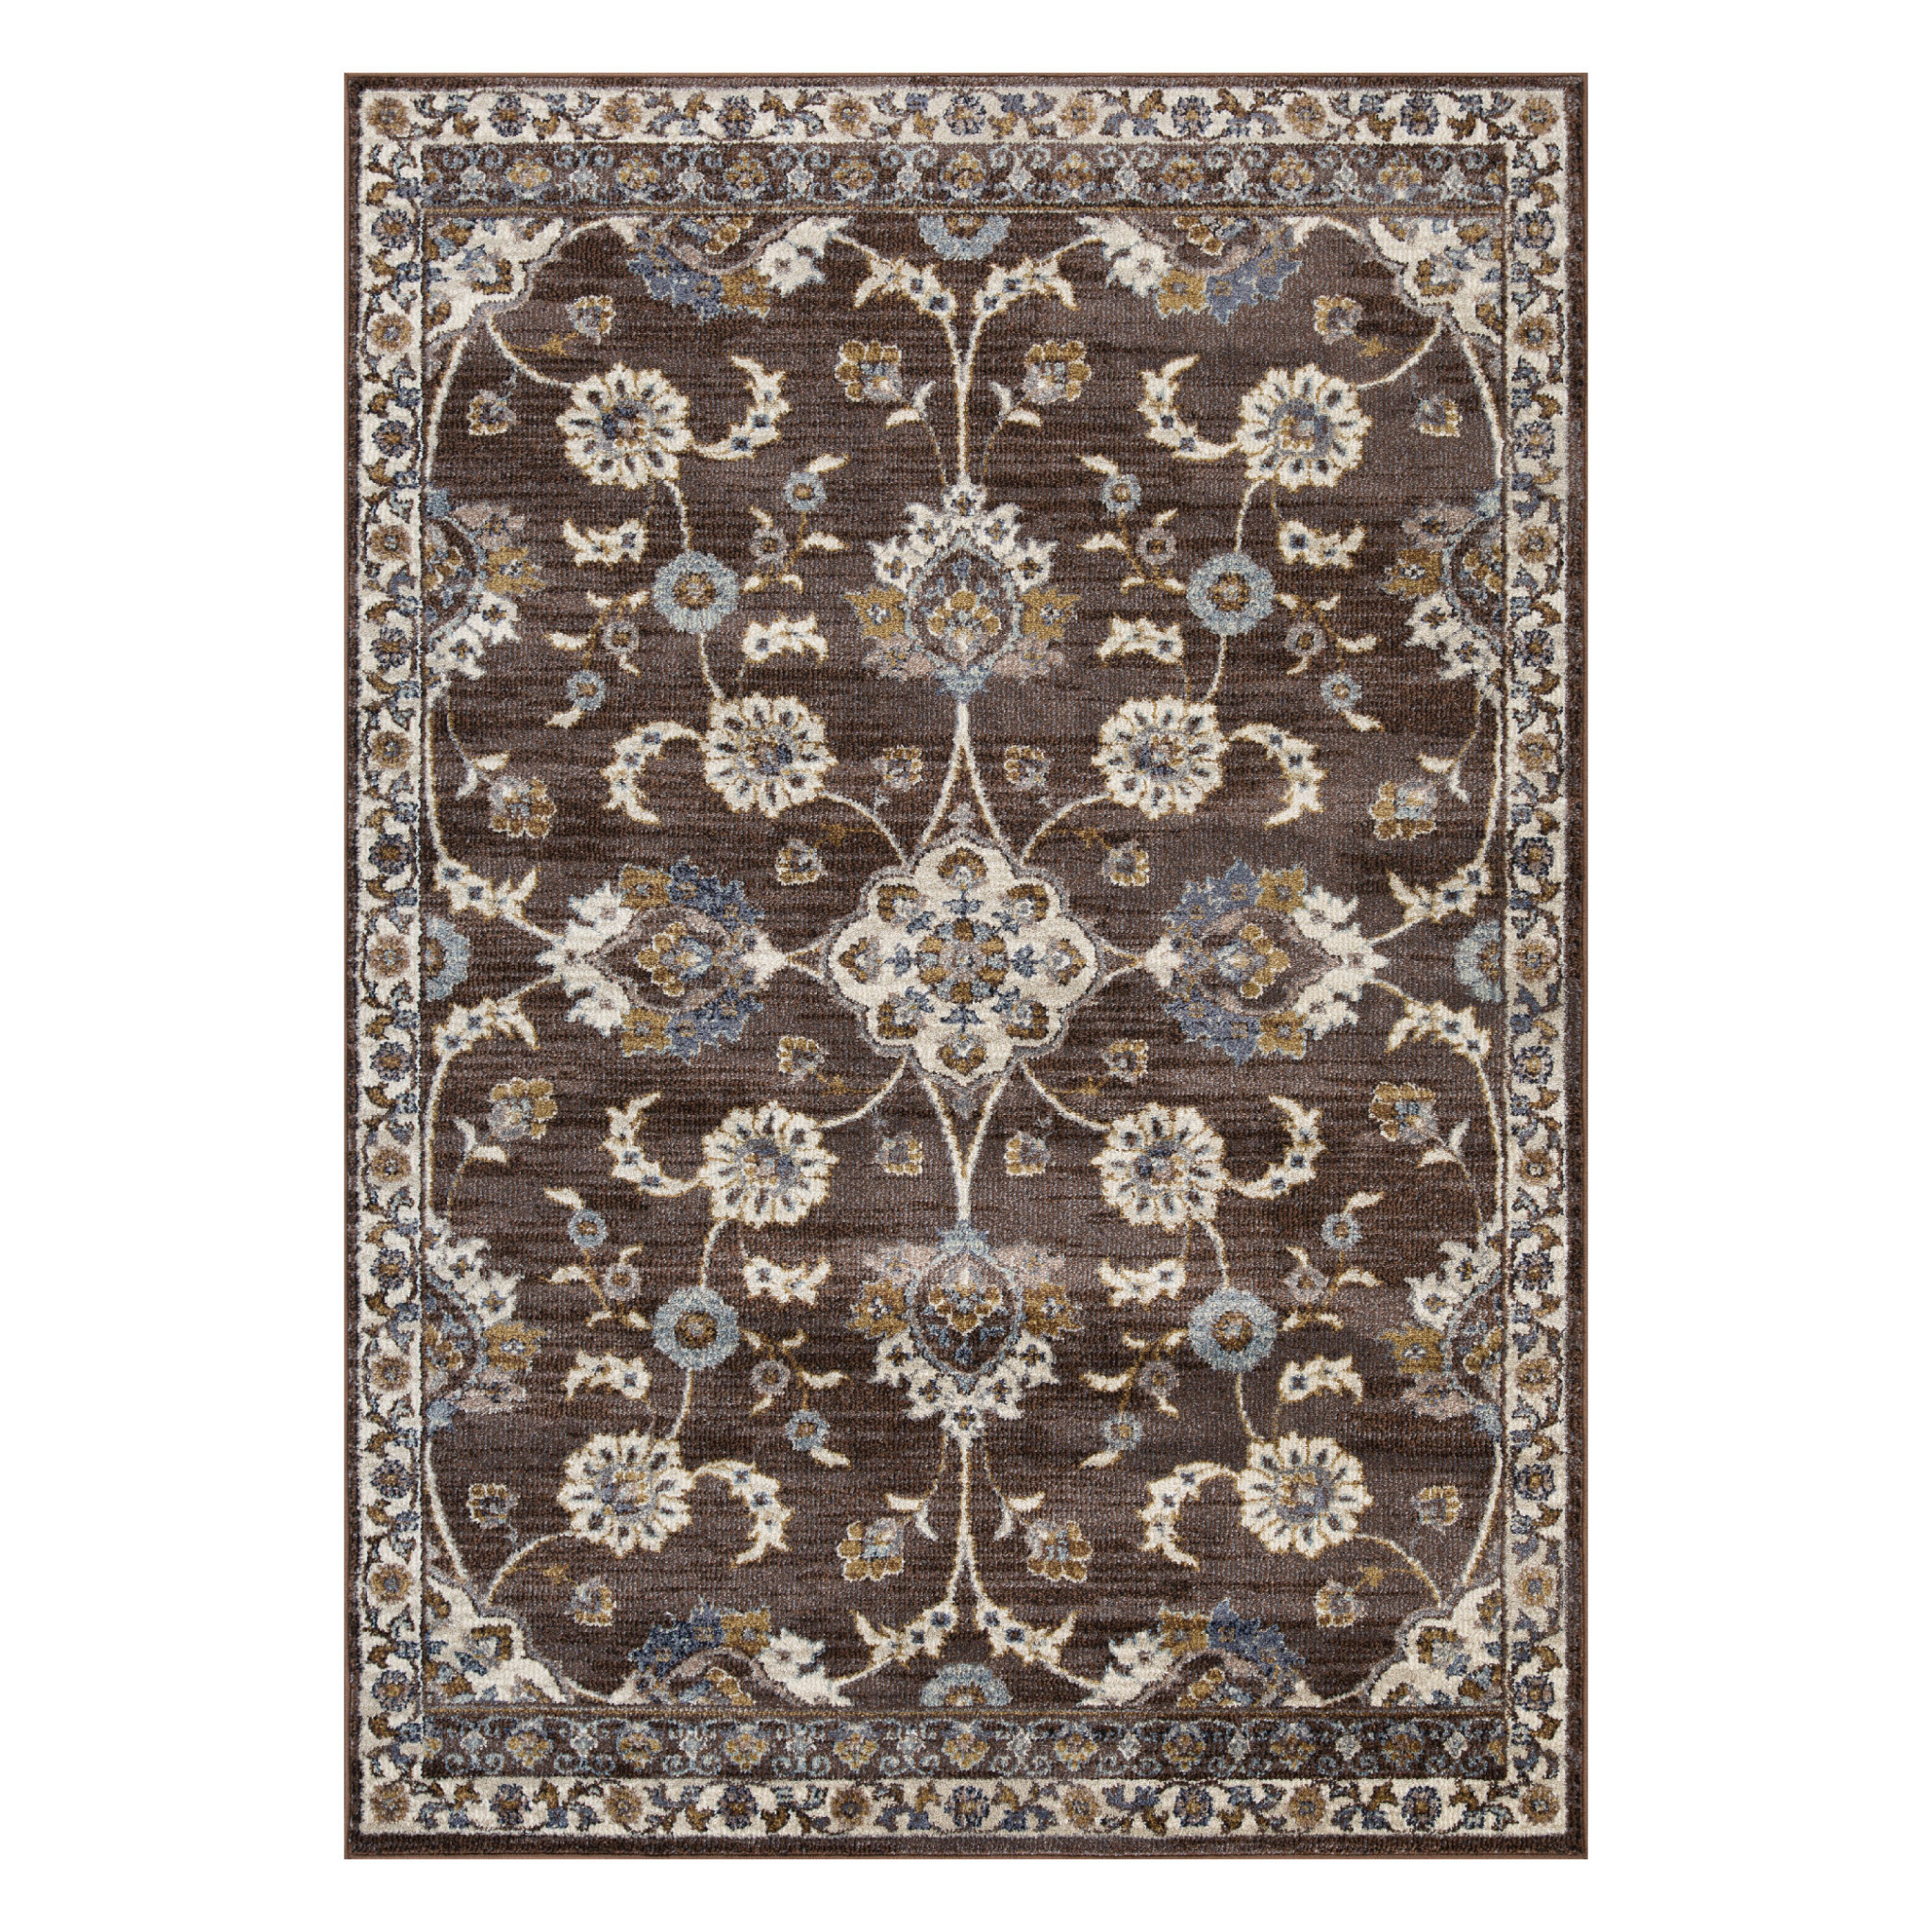 5' x 7' Brown Floral Power Loom Area Rug With Fringe-532149-1